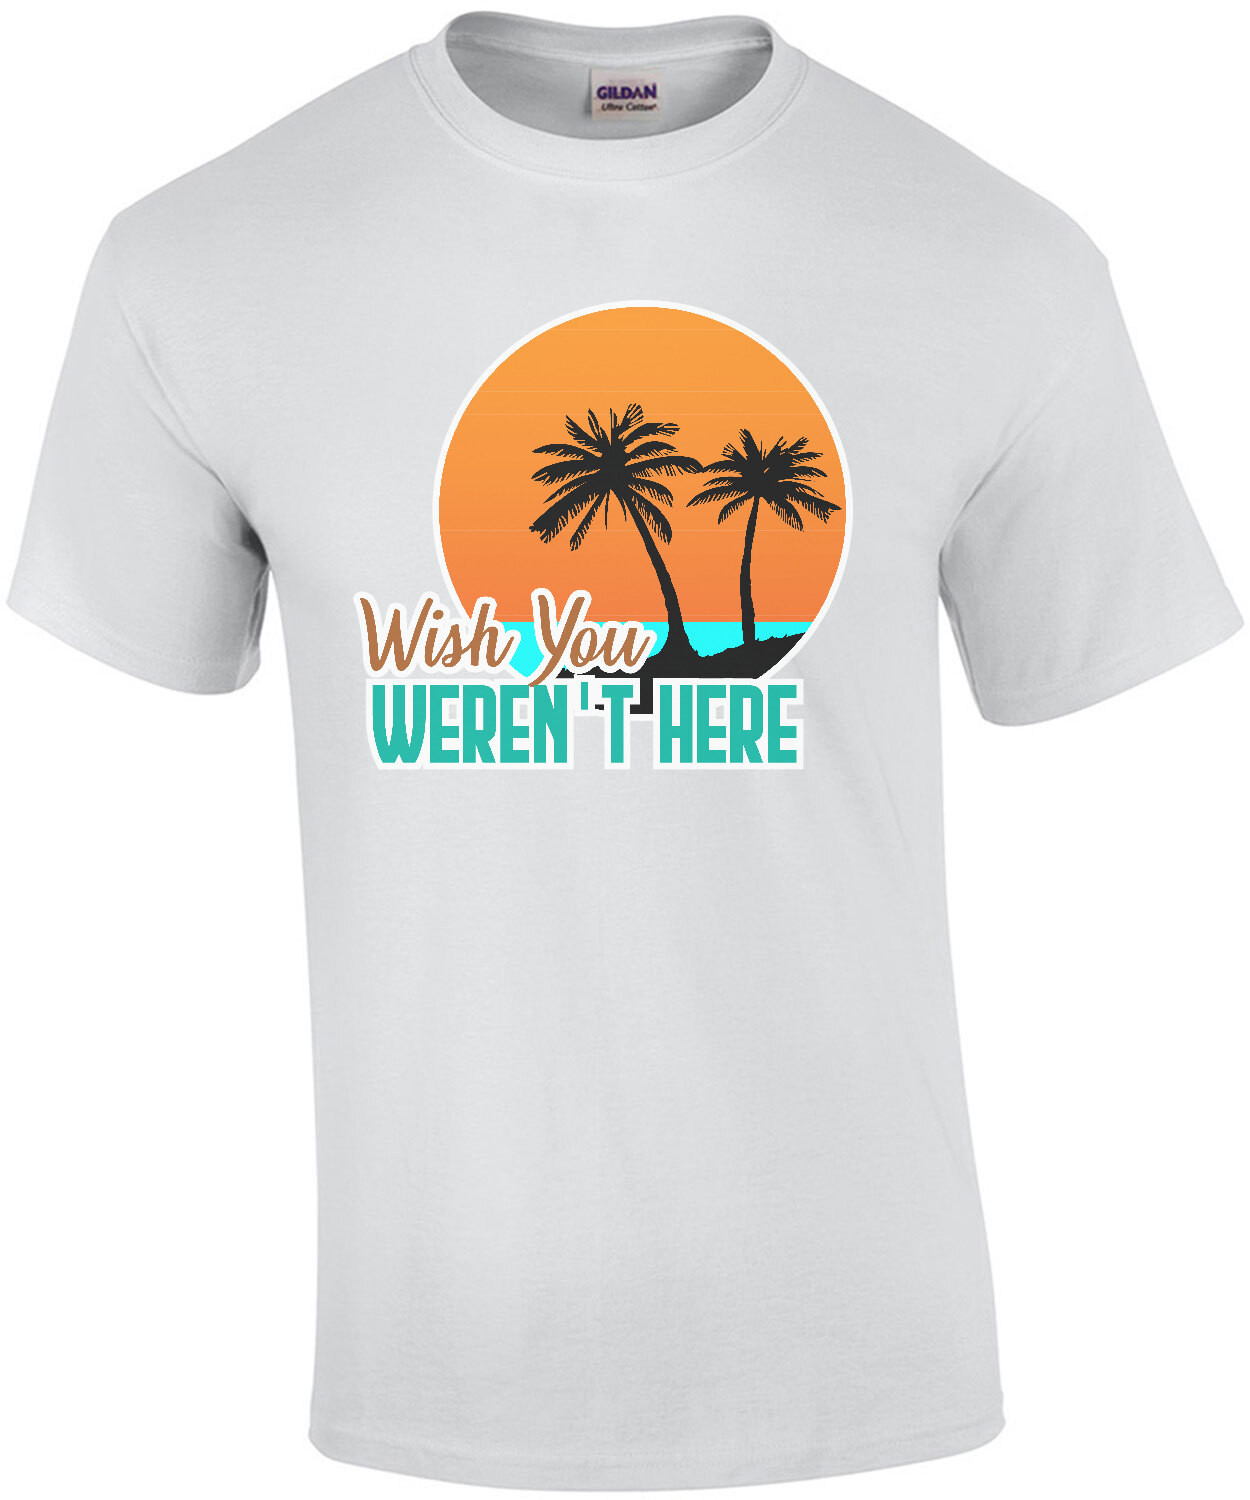 Wish you weren't here - funny sarcastic t-shirt